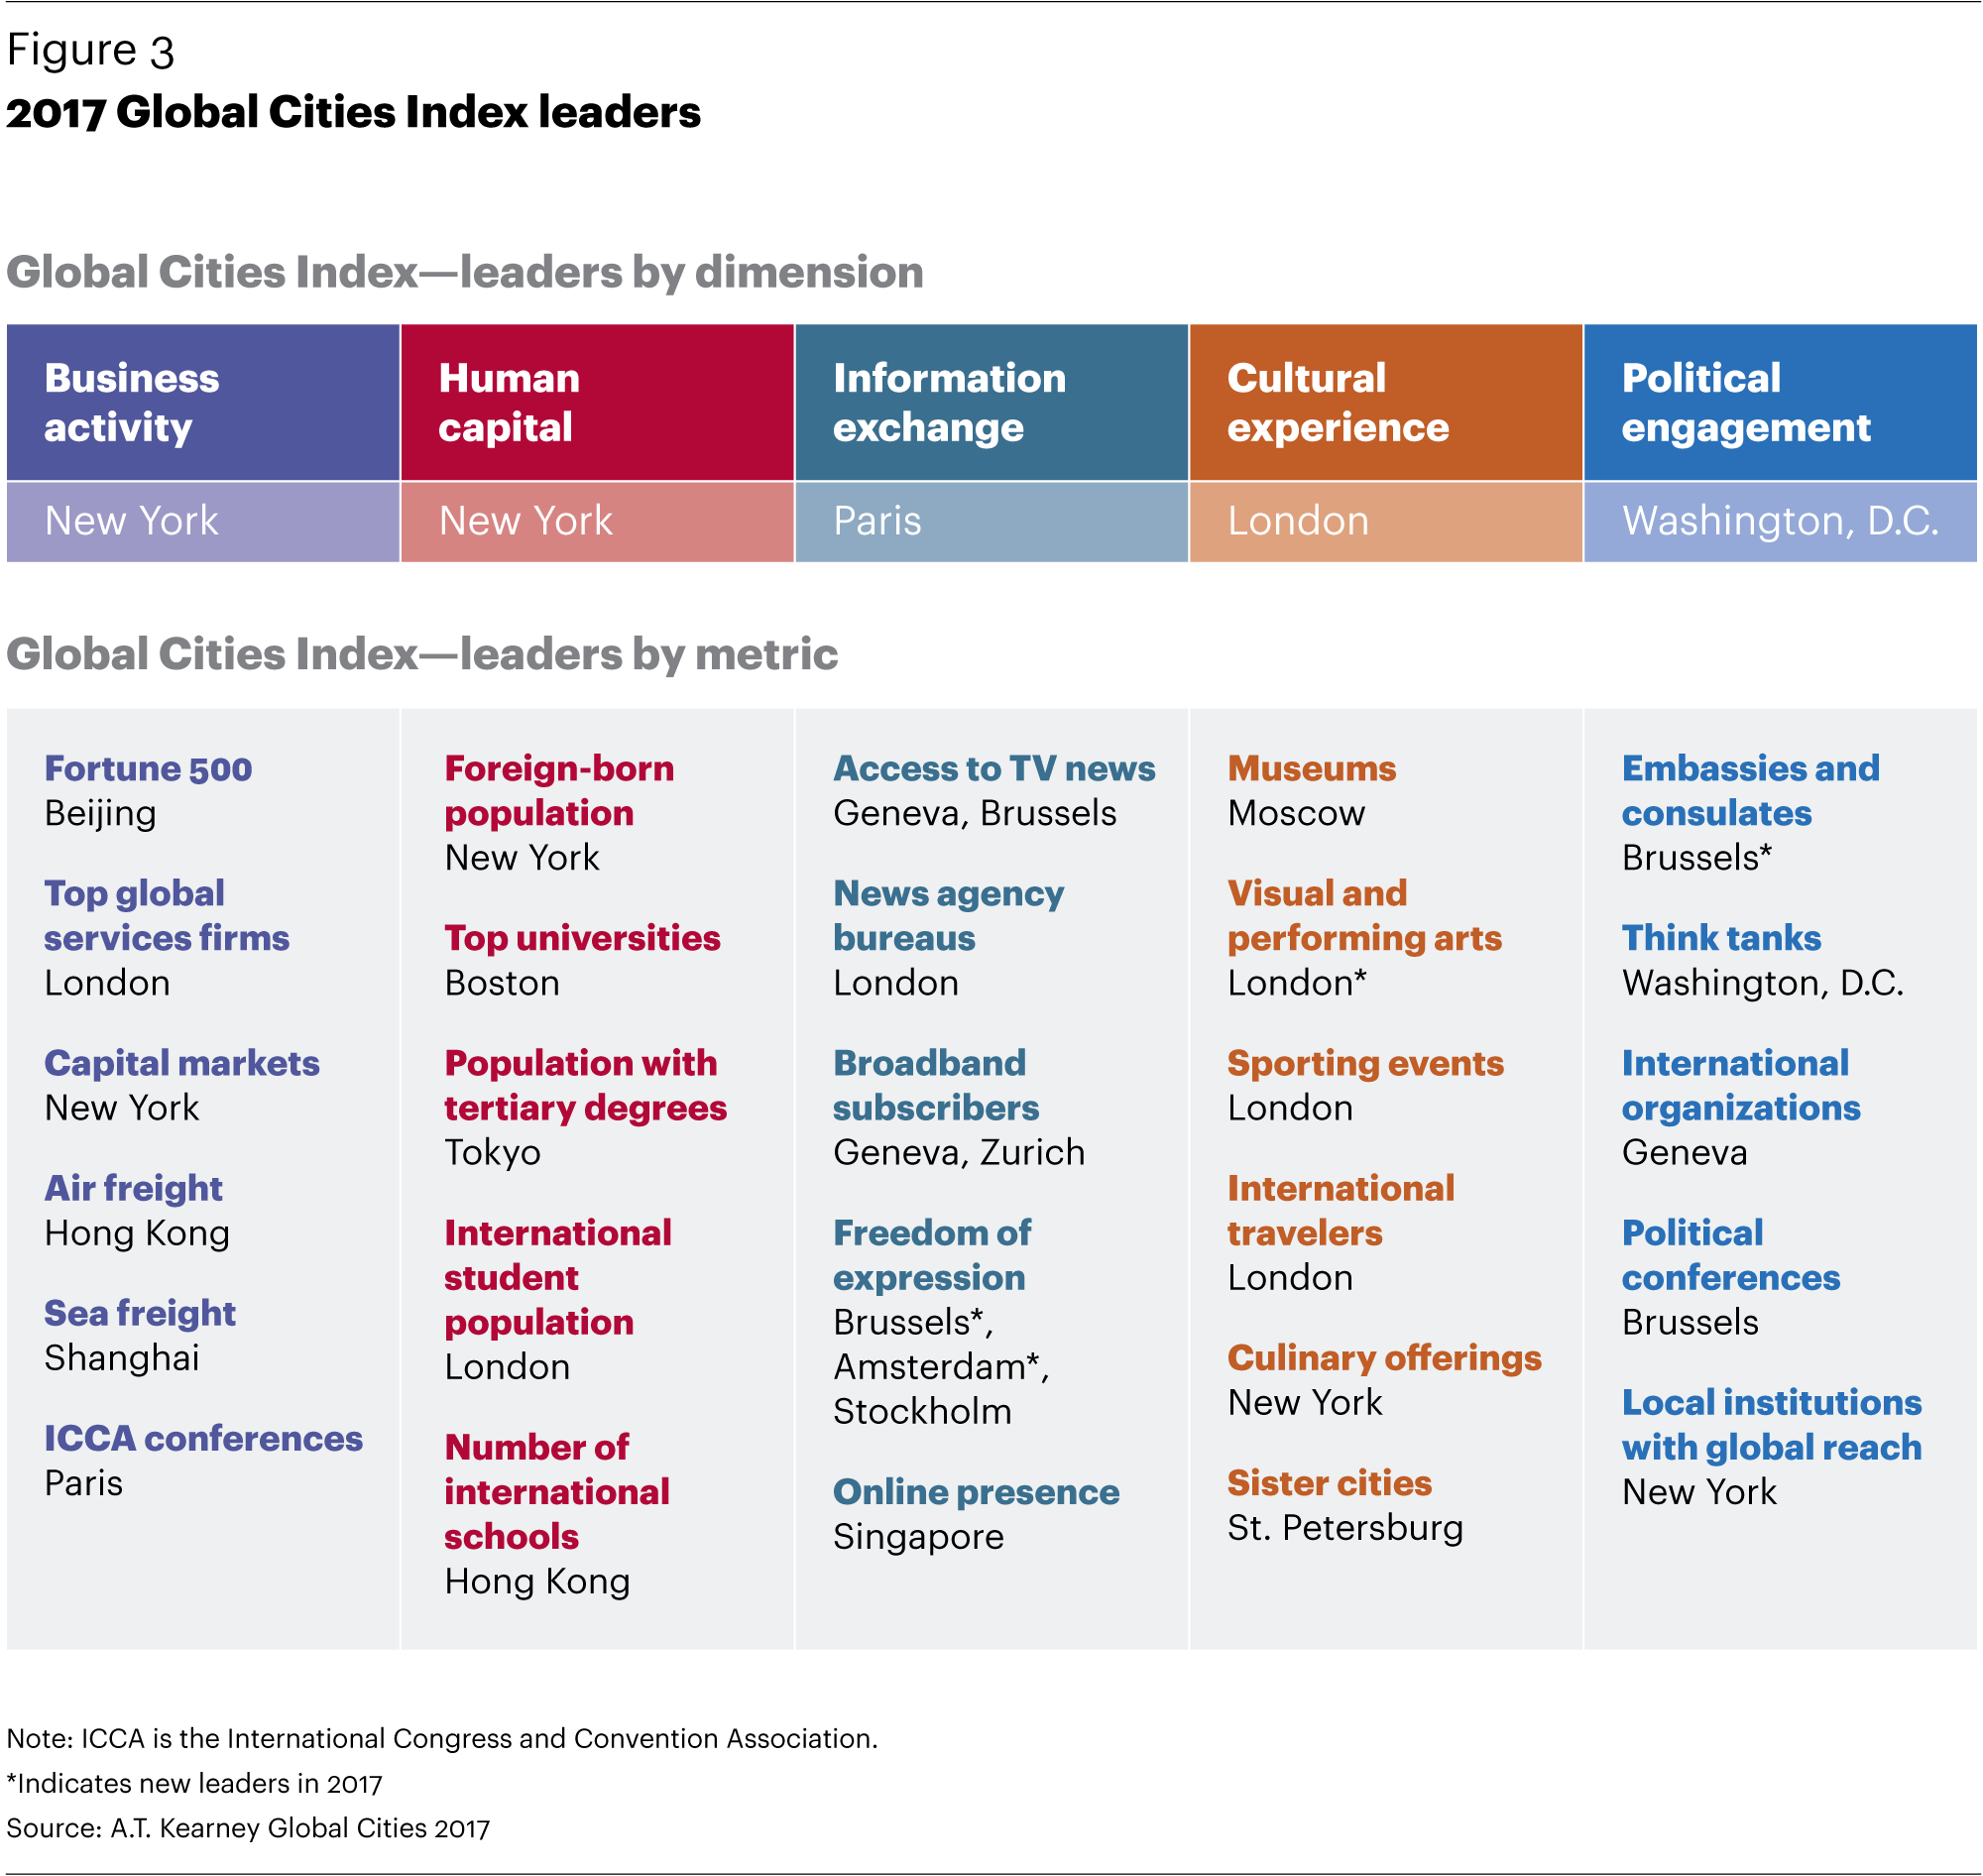 a.t.kearney global cities index